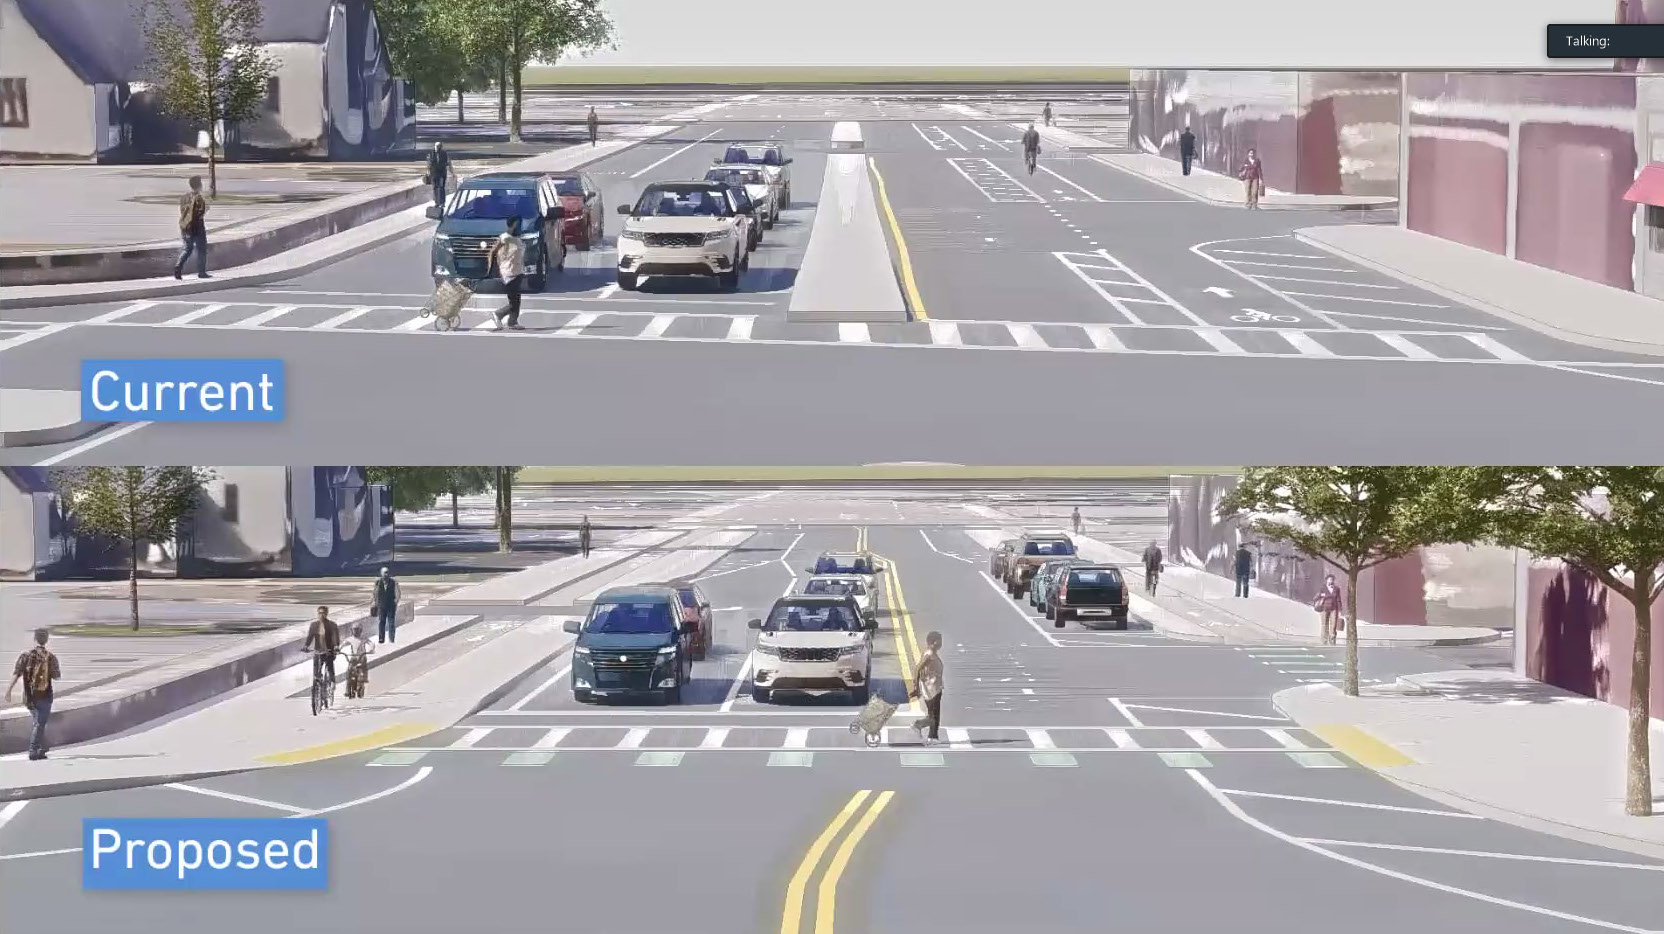 A before-and-after sketch of the City of Boston's proposed changes to Cummins Highway in Mattapan Square illustrates how the city plans to widen sidewalks, add trees, and reduce crossing distances for people walking to or from the neighborhoods west of the square. The design also includes physically protected bike lanes that would connect Cummins Highway to the Neponset Greenway across Blue Hill Avenue.